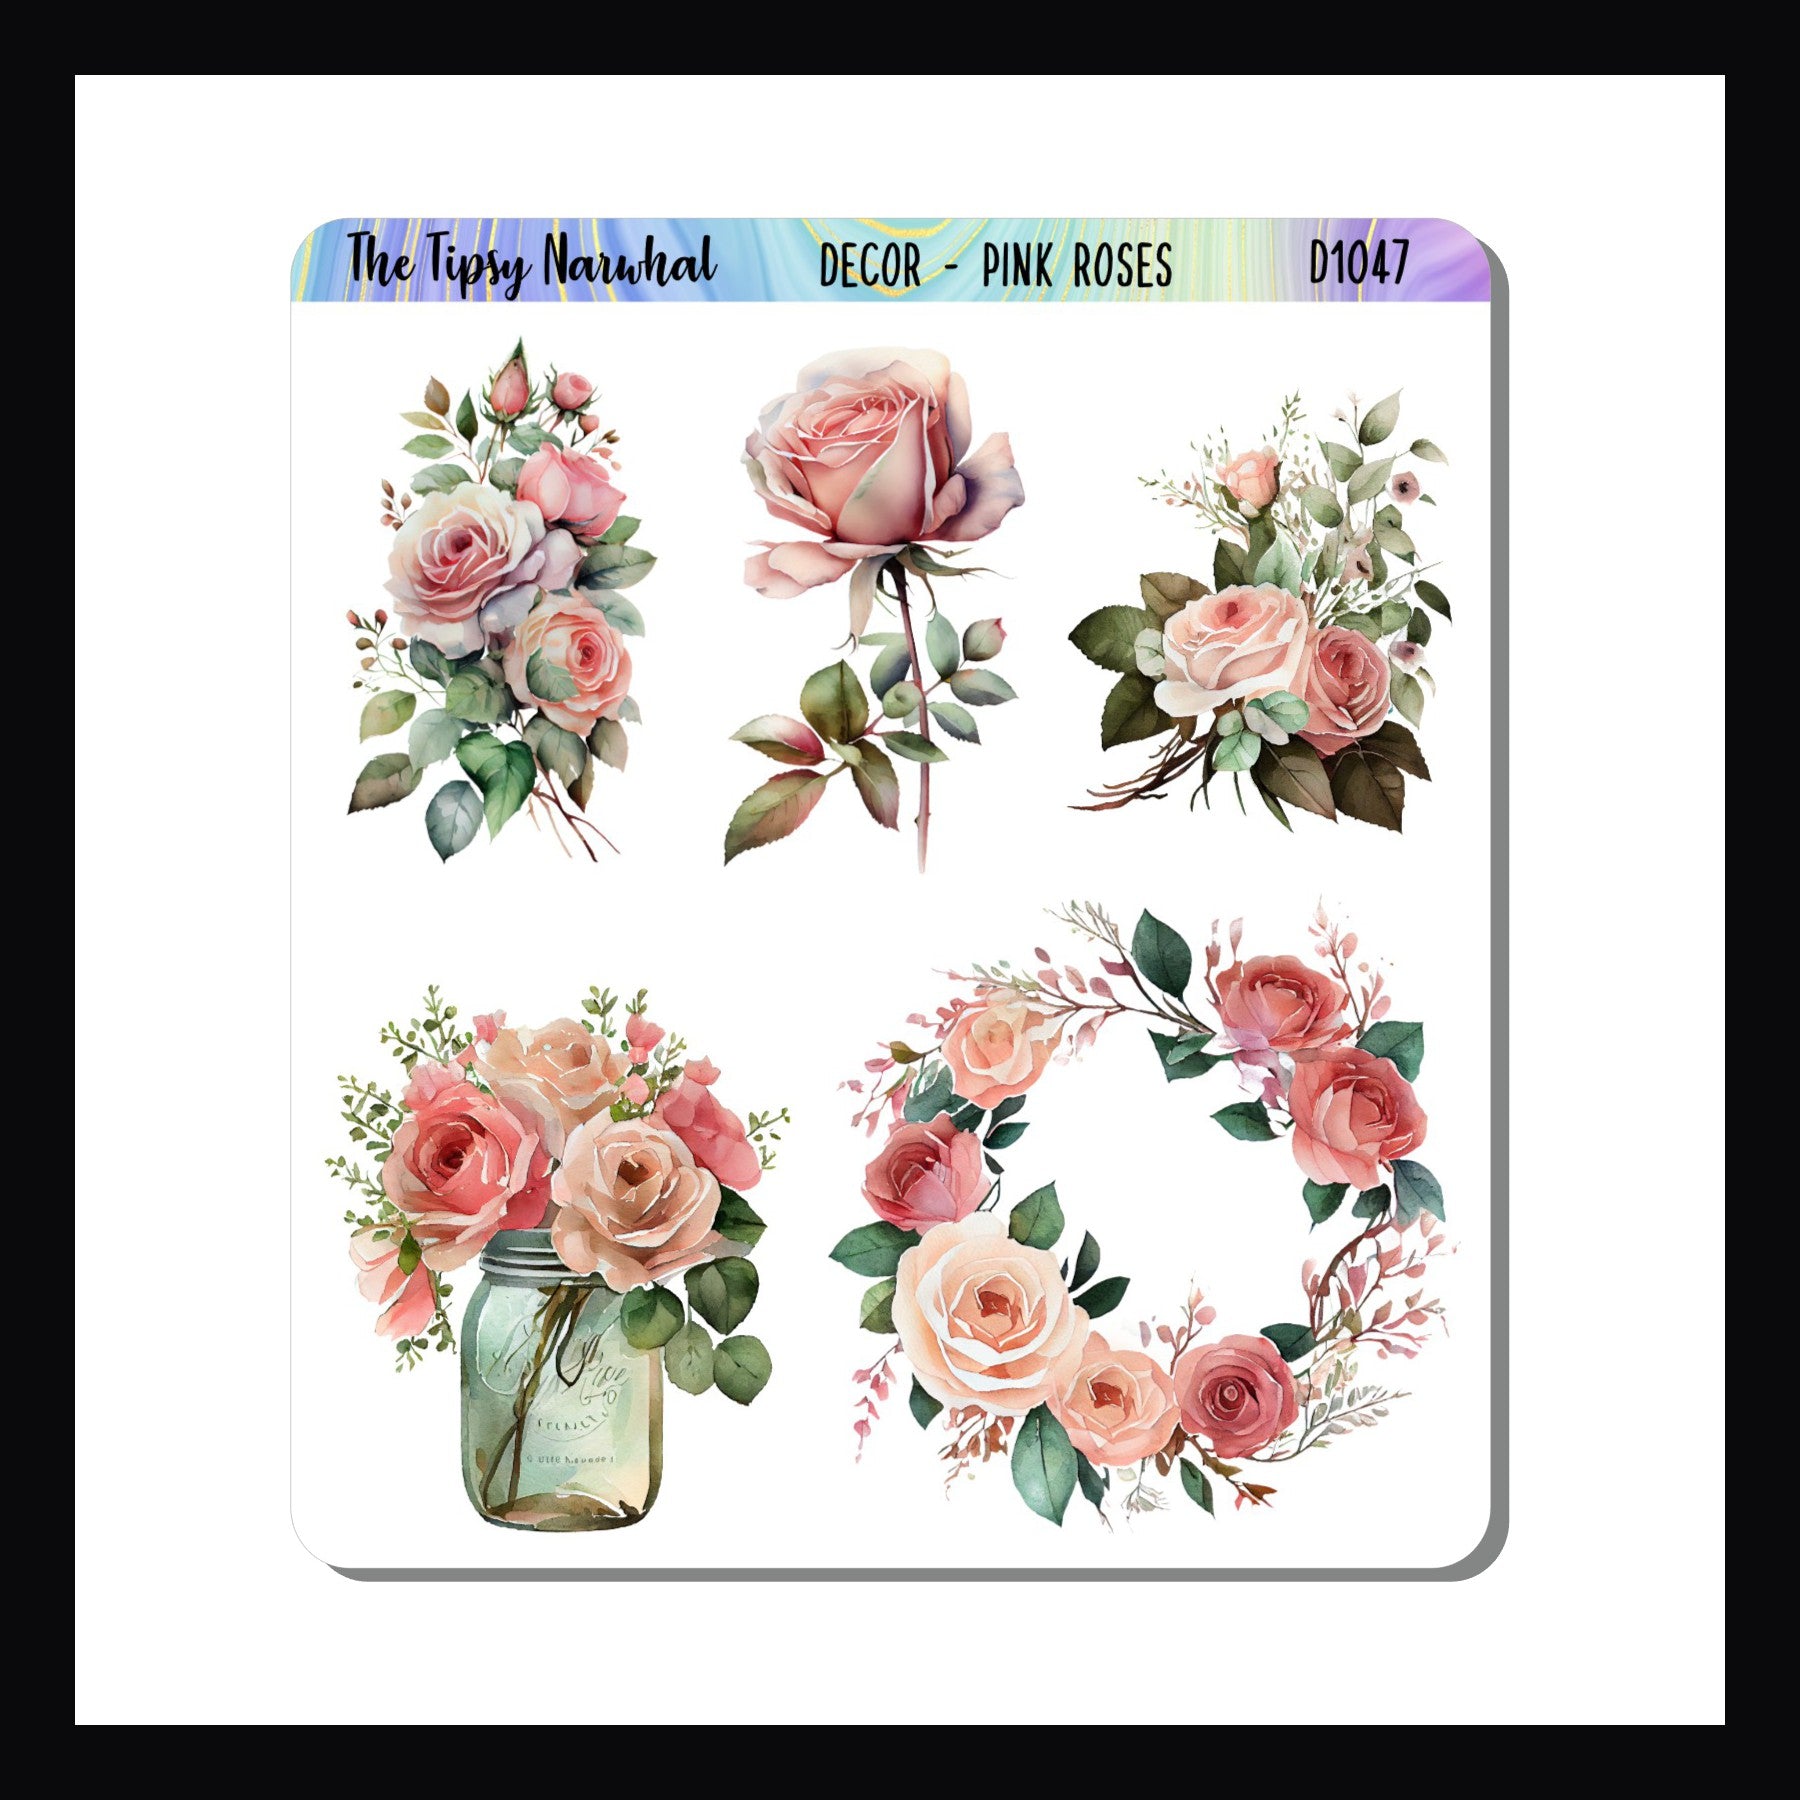 The Digital Pink Roses Decor Sheet is the digital/printable version of our Pink Roses Decor Sheet.  It features 5 stickers of various sizes all depicting pink roses.  Includes a rose wreath, single rose stem, and bouquets.